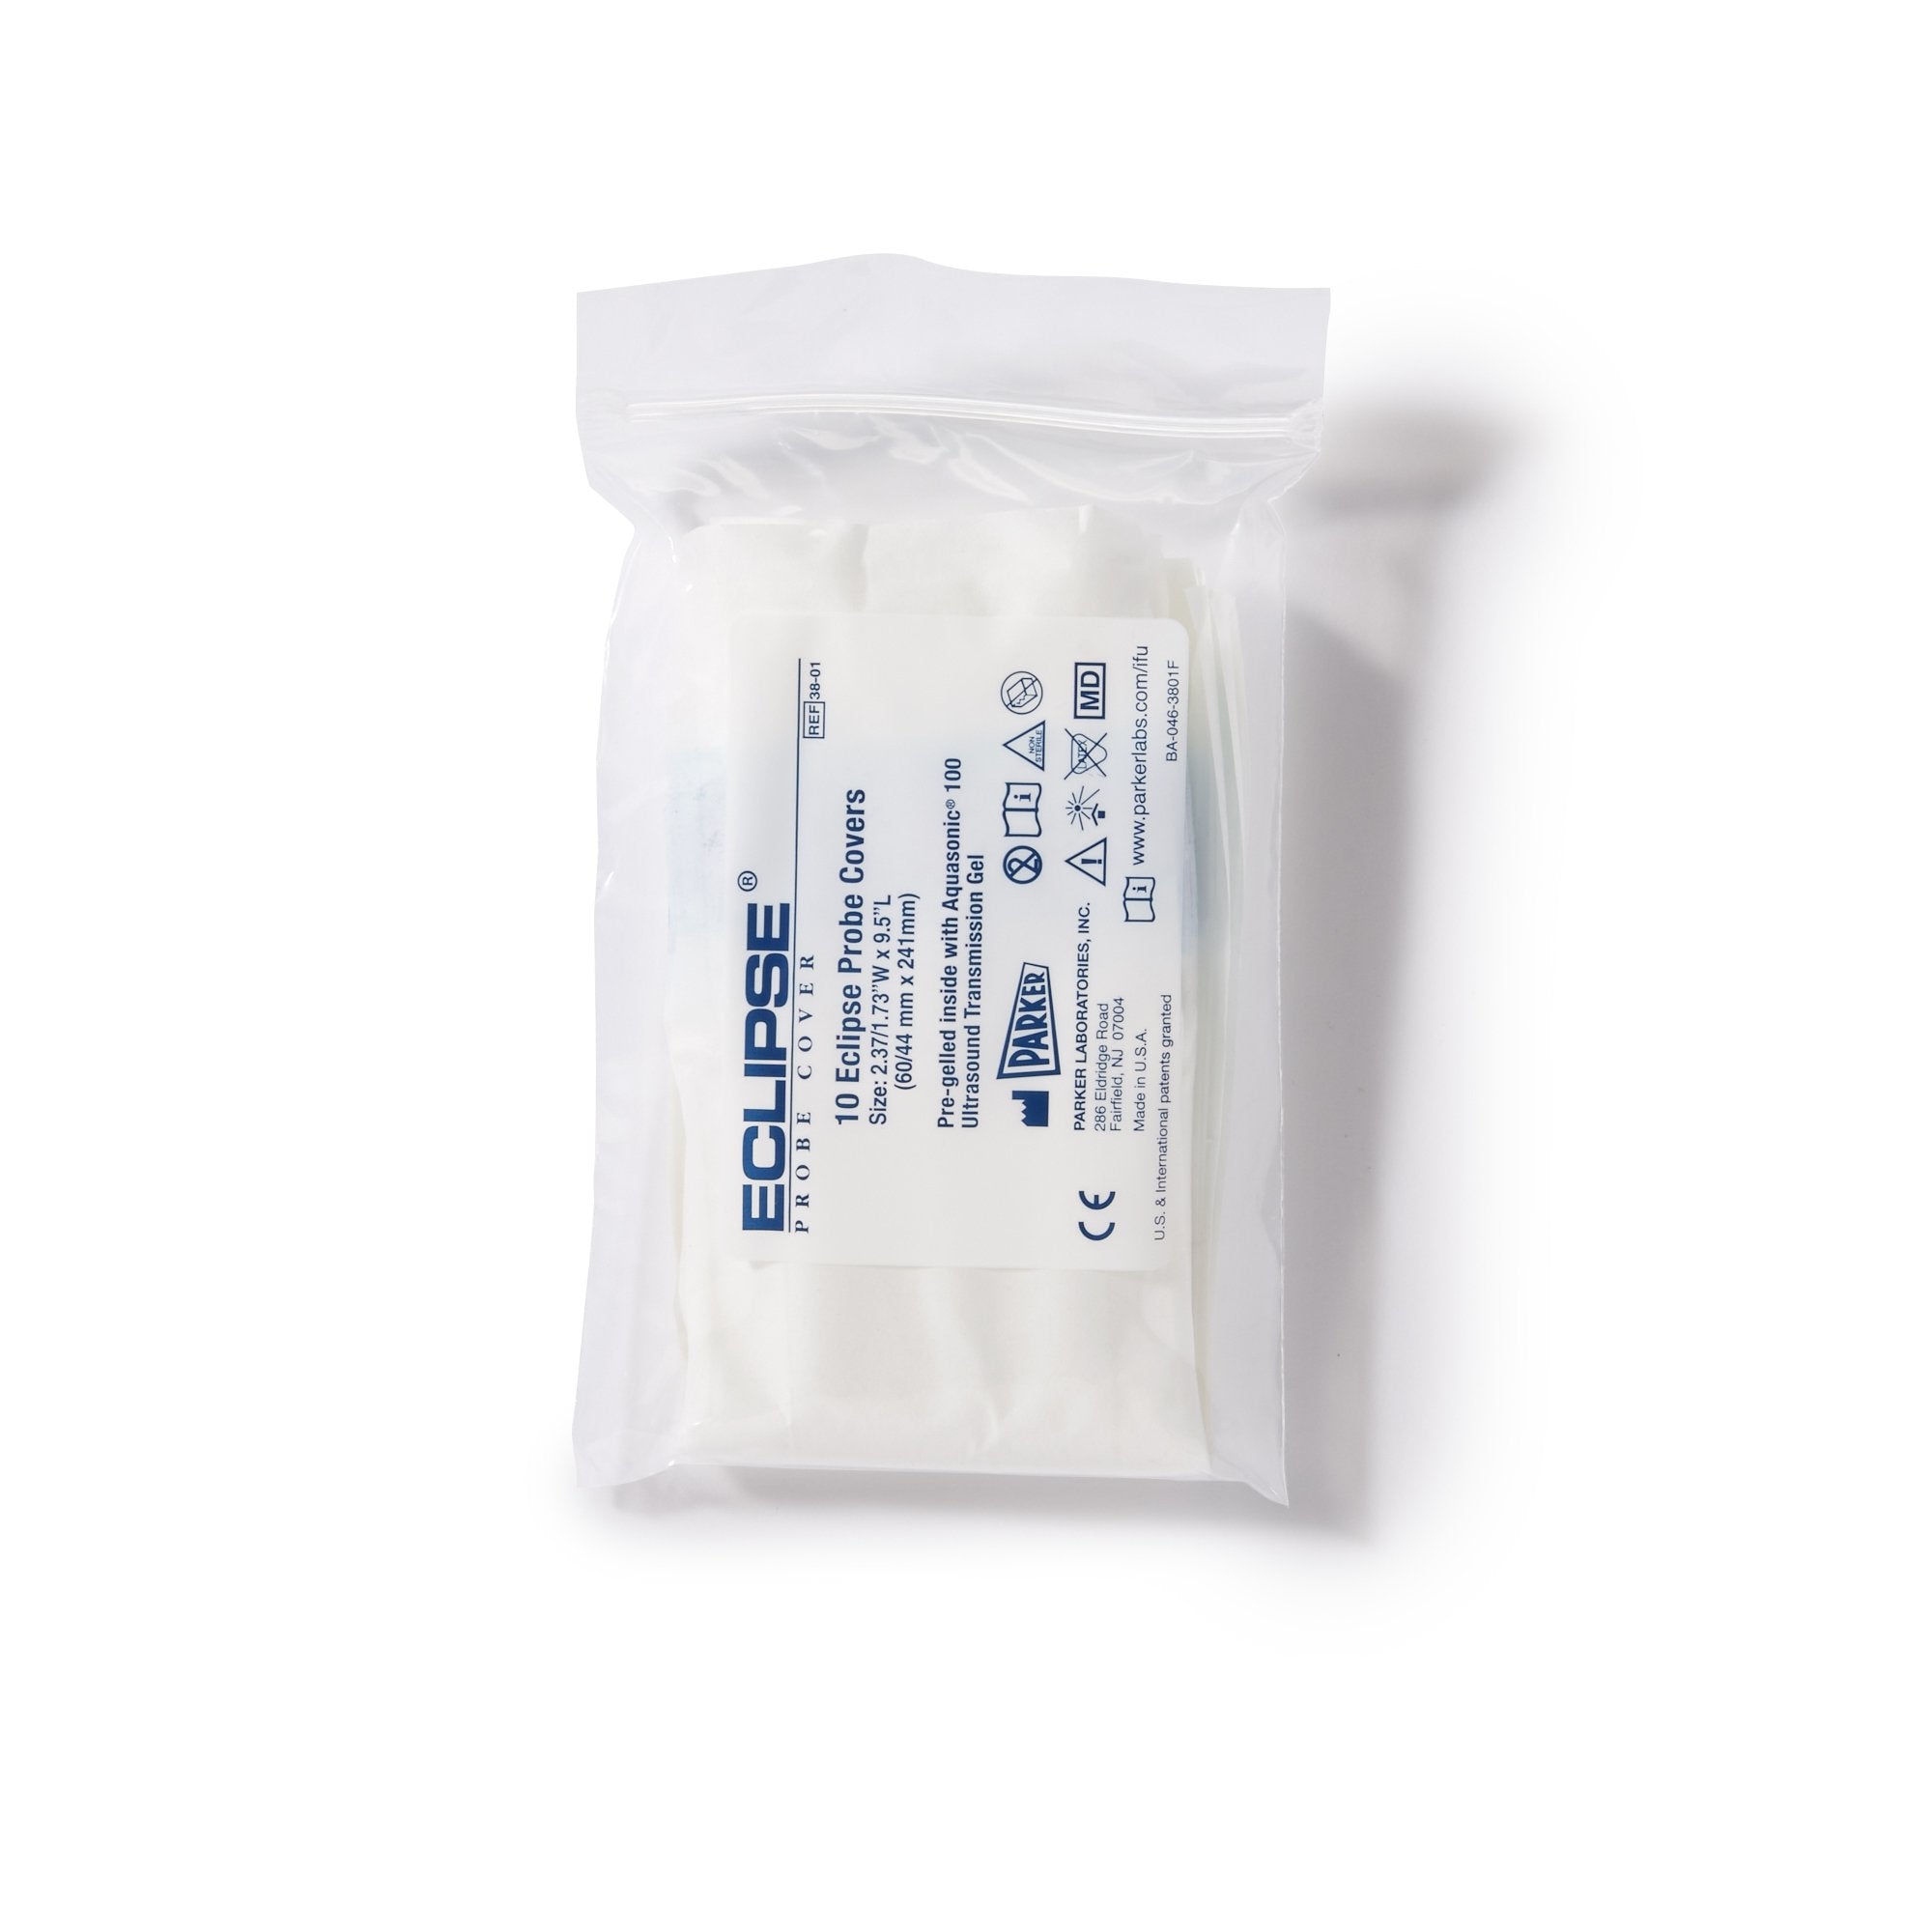 Ultrasound Probe Cover Eclipse 1-3/4 X 9-1/2 Inch Polyisoprene NonSterile For use with Ultrasound Endocavity Probe